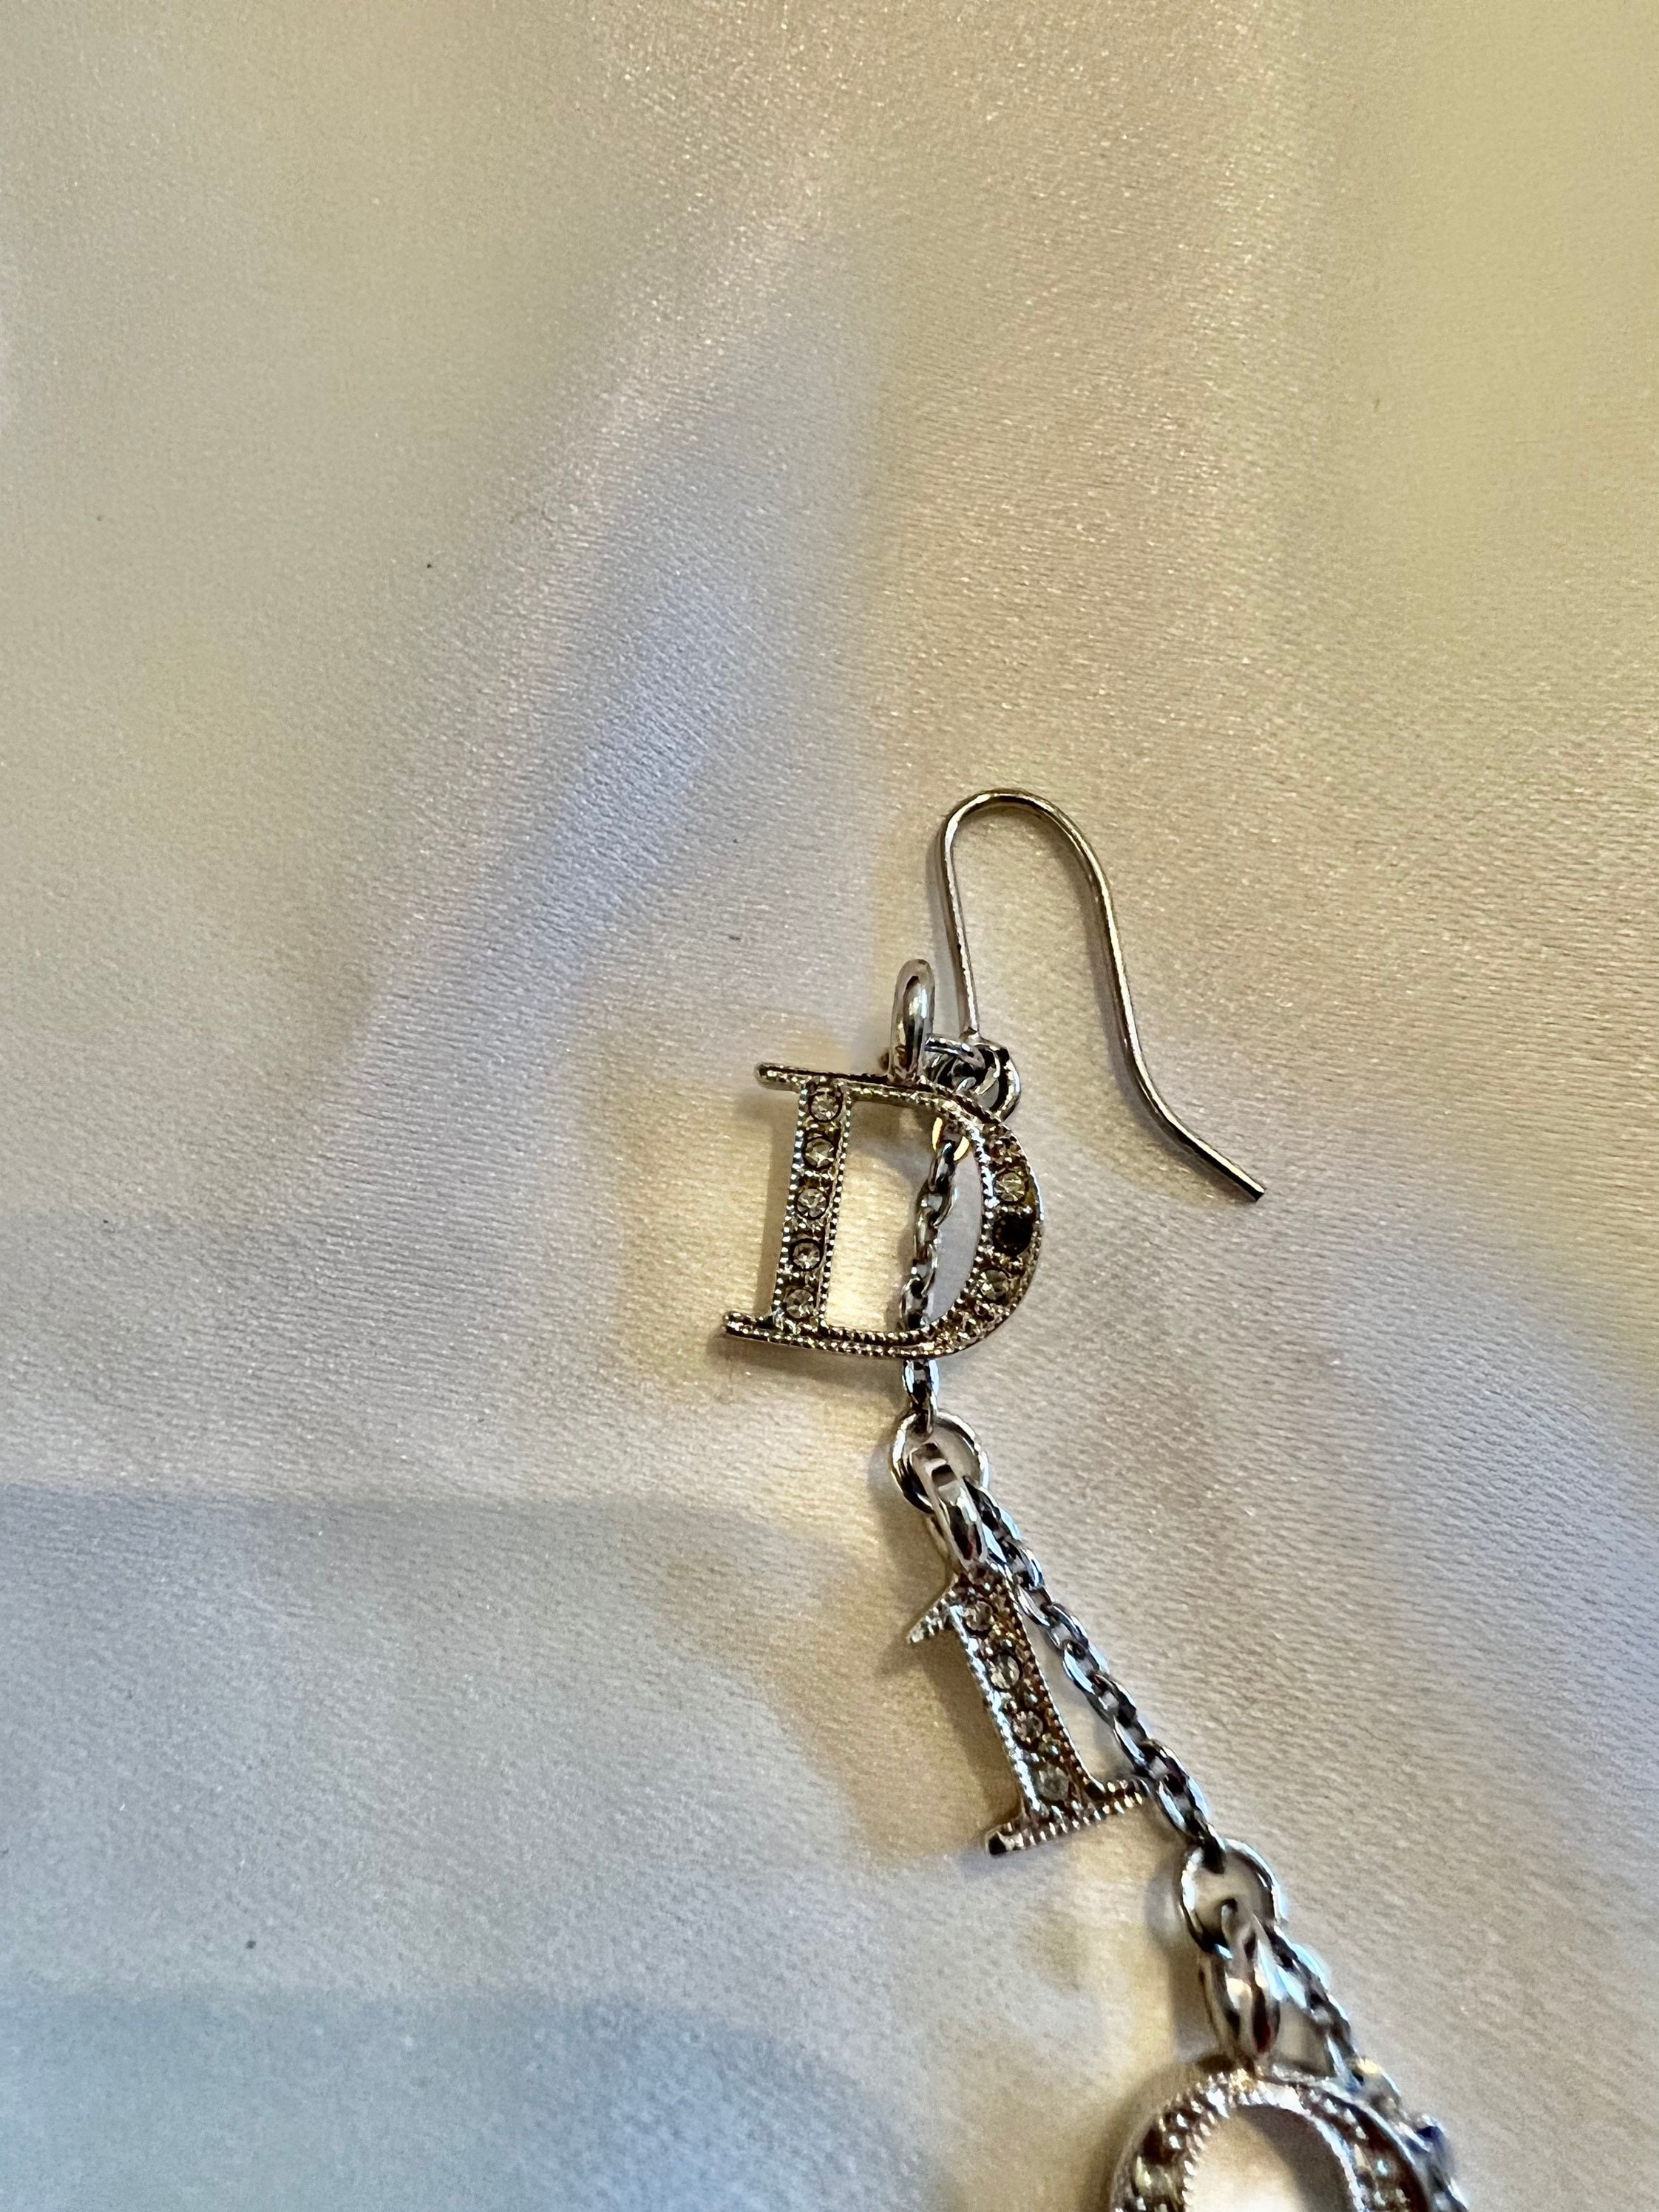 Christian Dior Silver Metal and Crystals Dangle Earrings